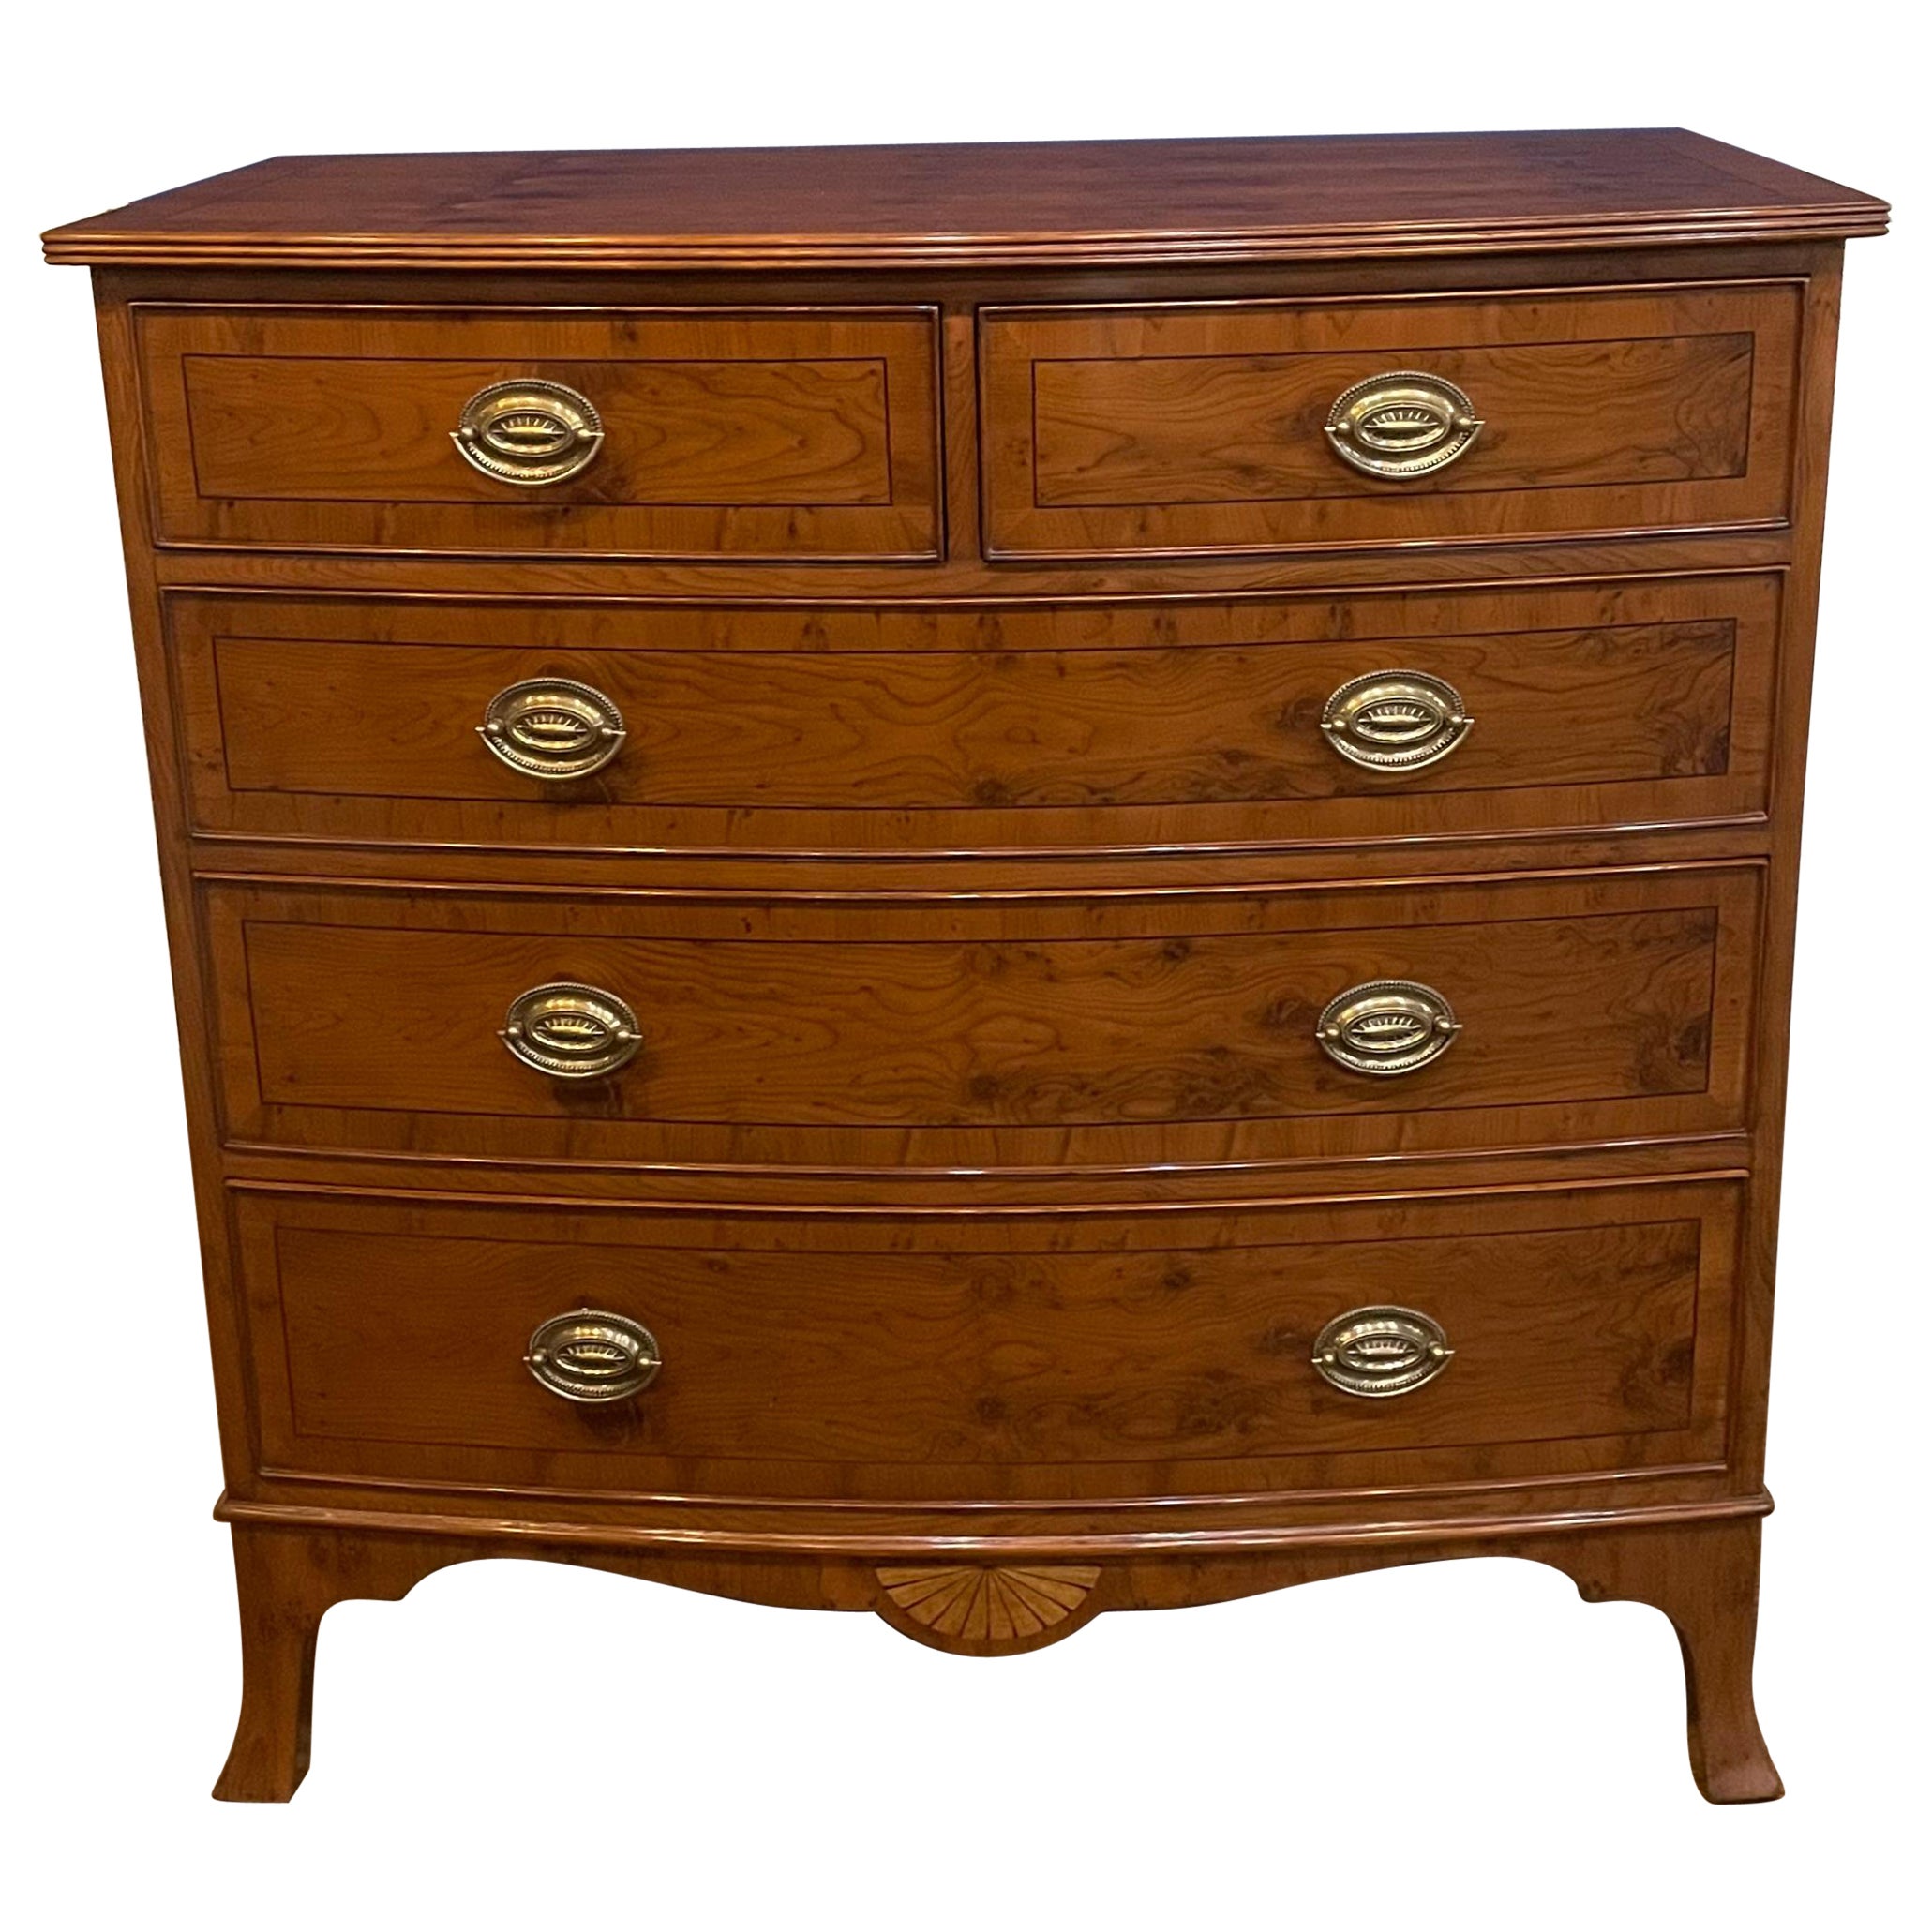 Leighton Hall Furniture Commodes and Chests of Drawers